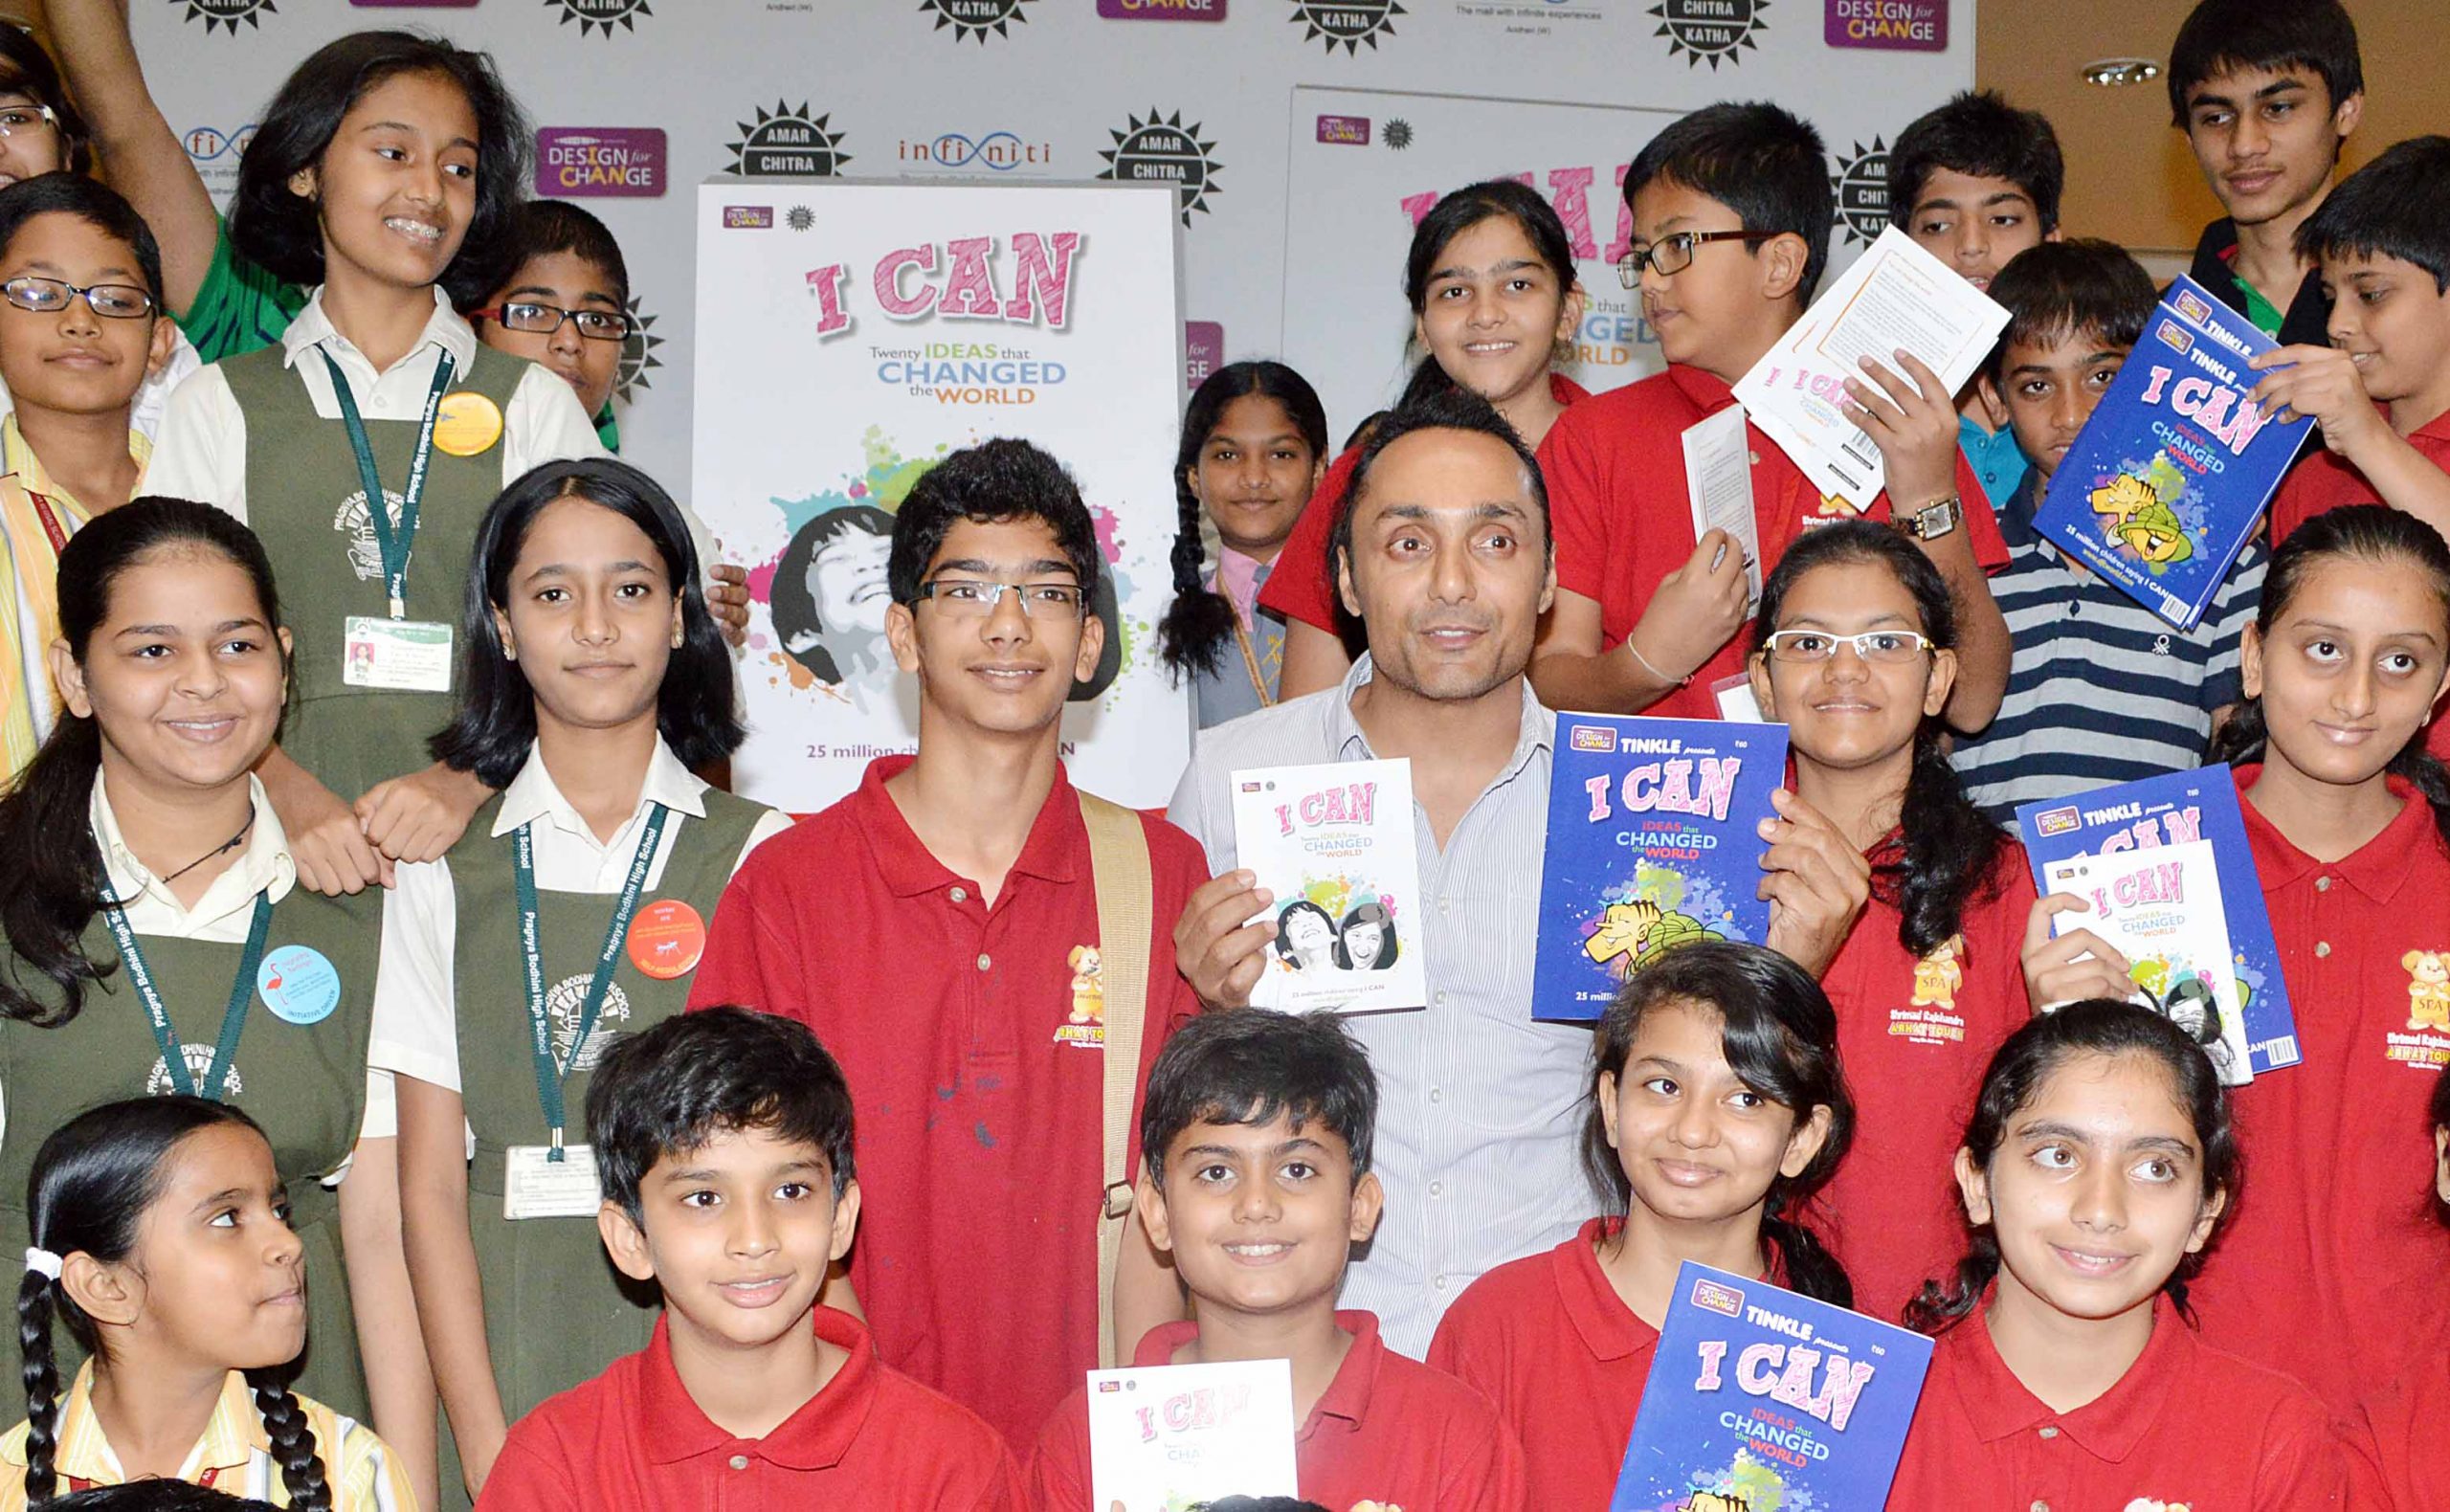 Rahul Bose at the launch of Amar Chitra Katha & Tinkle books as part of Design For Change initiative